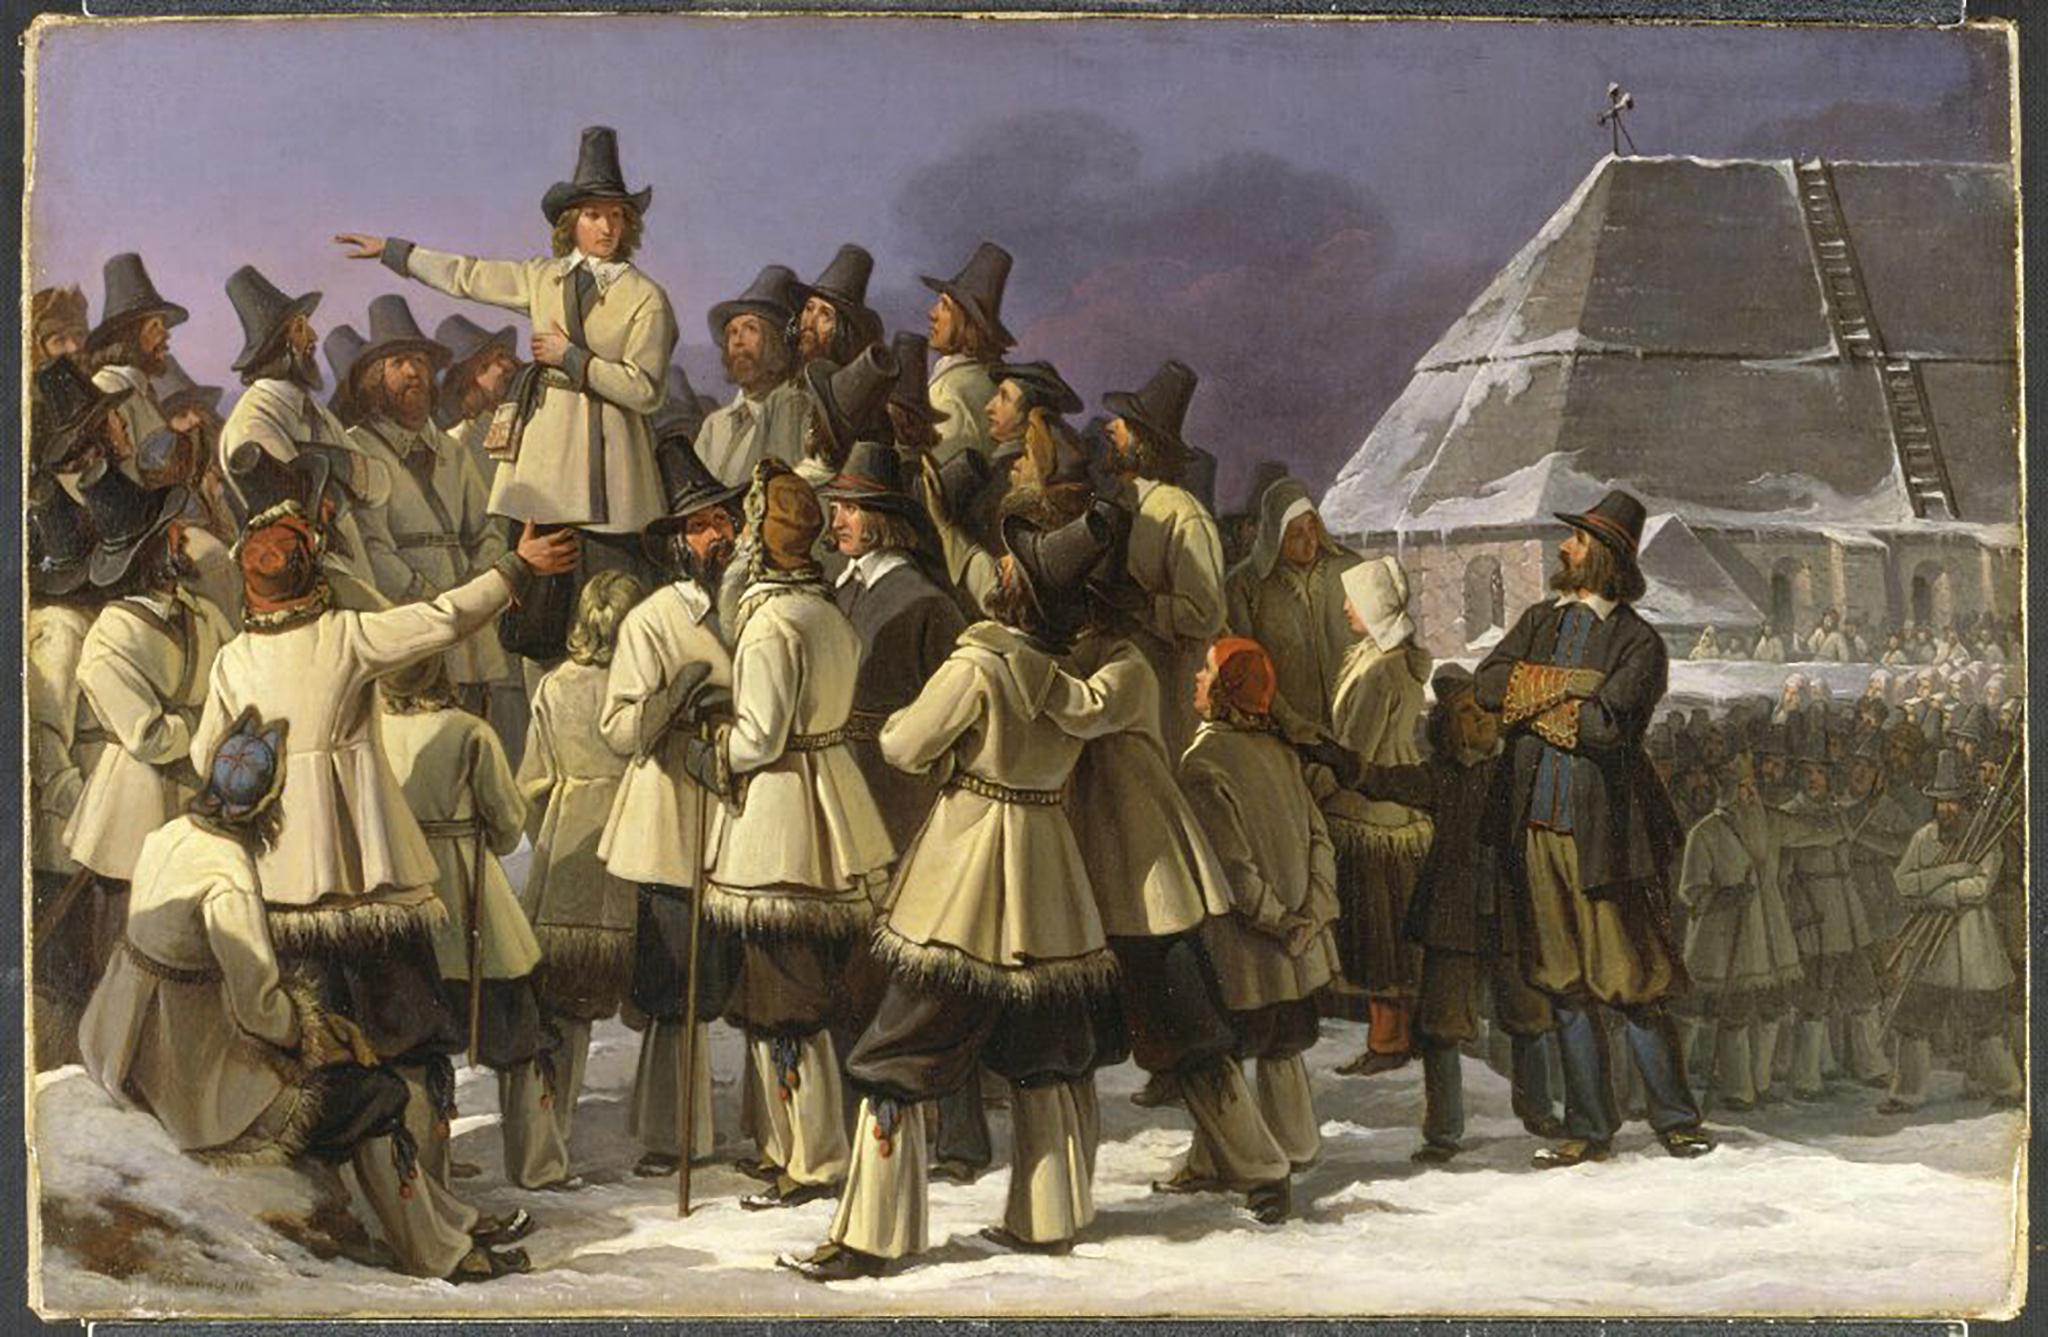 A snapshot from the history of Sweden – a painting showing a group of men gathered around a man standing in a raised position pointing with his arm.